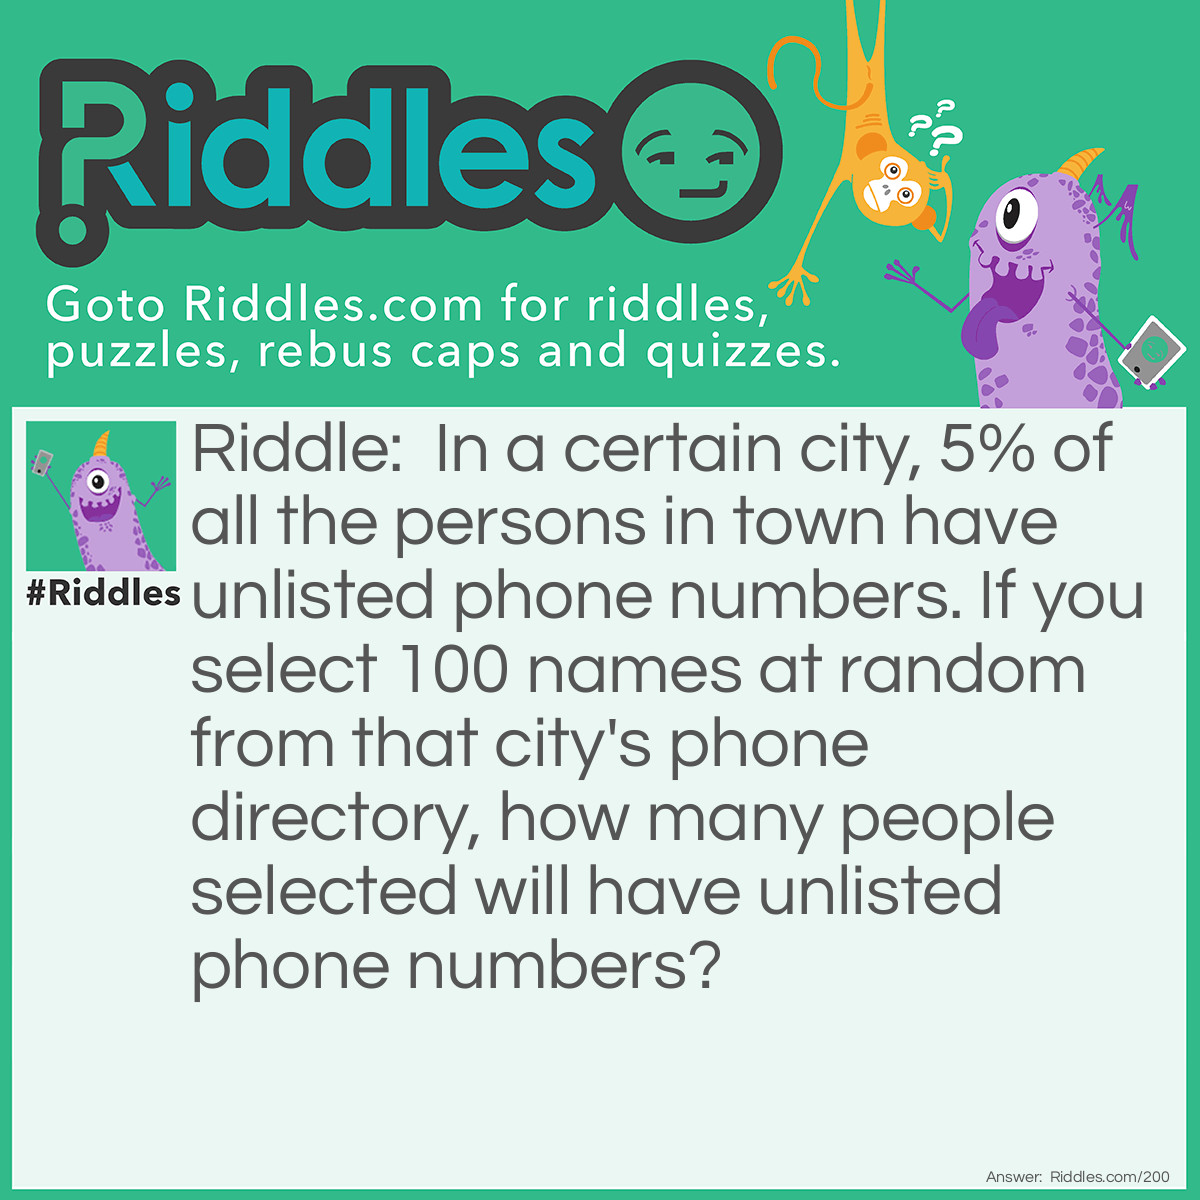 Riddle: In a certain city, 5% of all the persons in town have unlisted phone numbers. If you select 100 names at random from that city's phone directory, how many people selected will have unlisted phone numbers? Answer: None. If their names are in the phone directory, they do not have unlisted phone numbers!